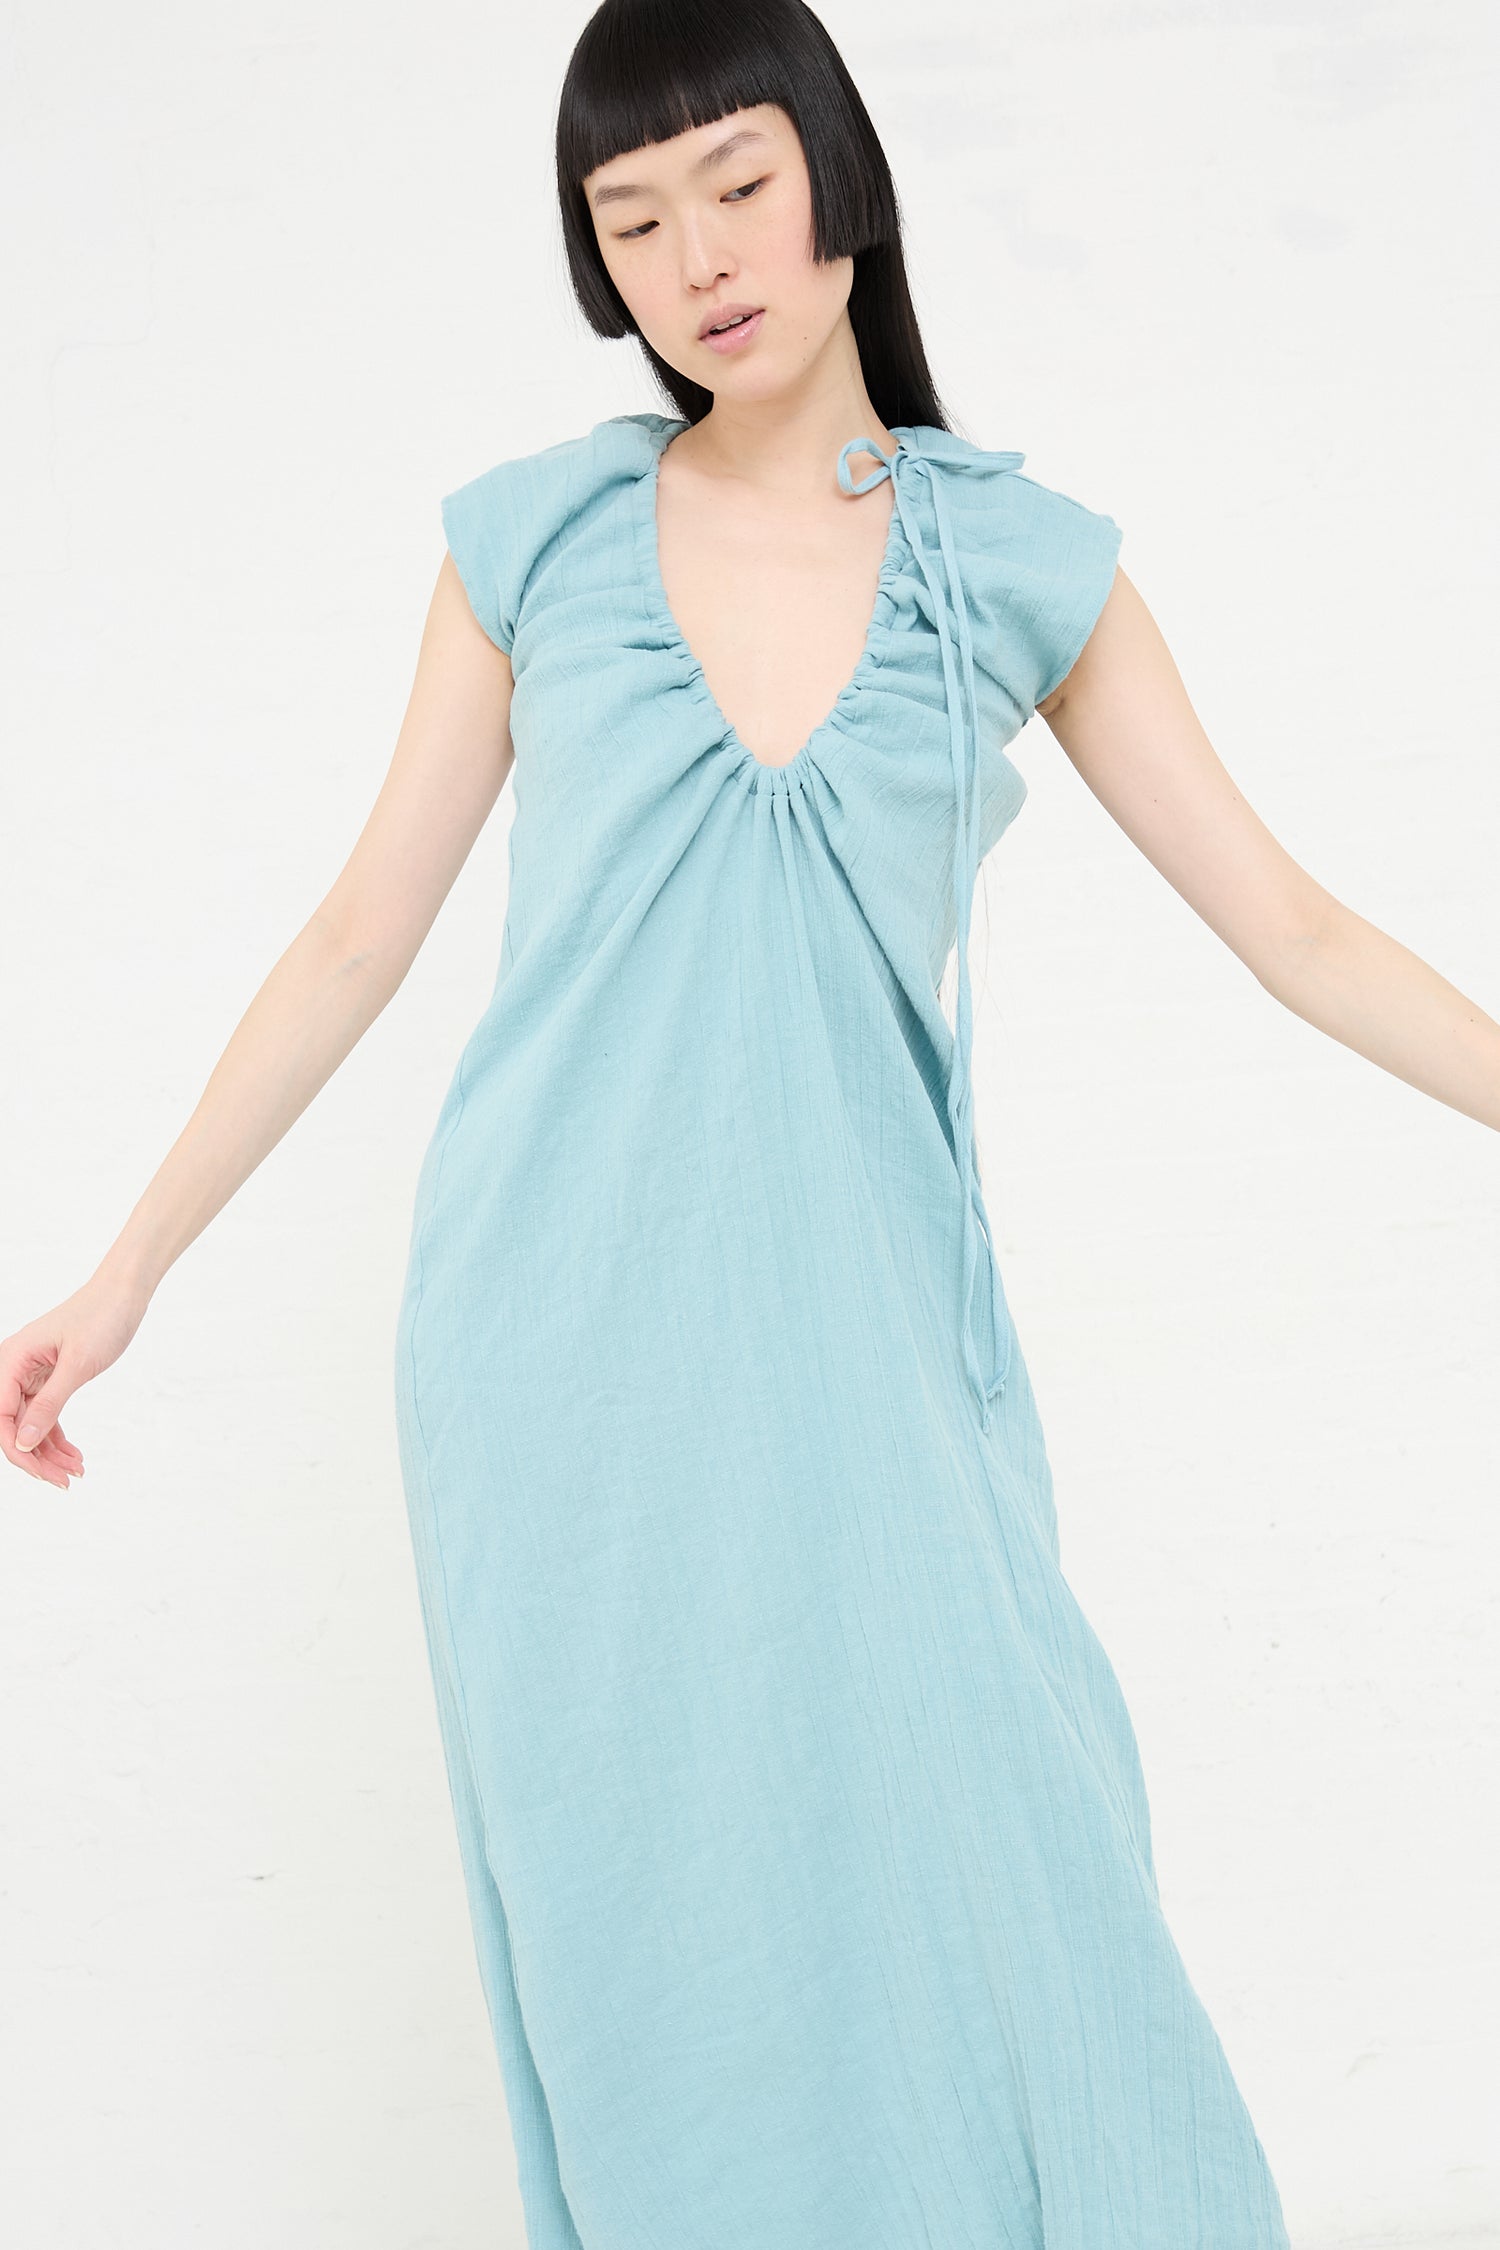 Woman posing in a Crinkle Linen Cotton Max Dress in Wuxi Blue by Baserange, with a tied shoulder detail.